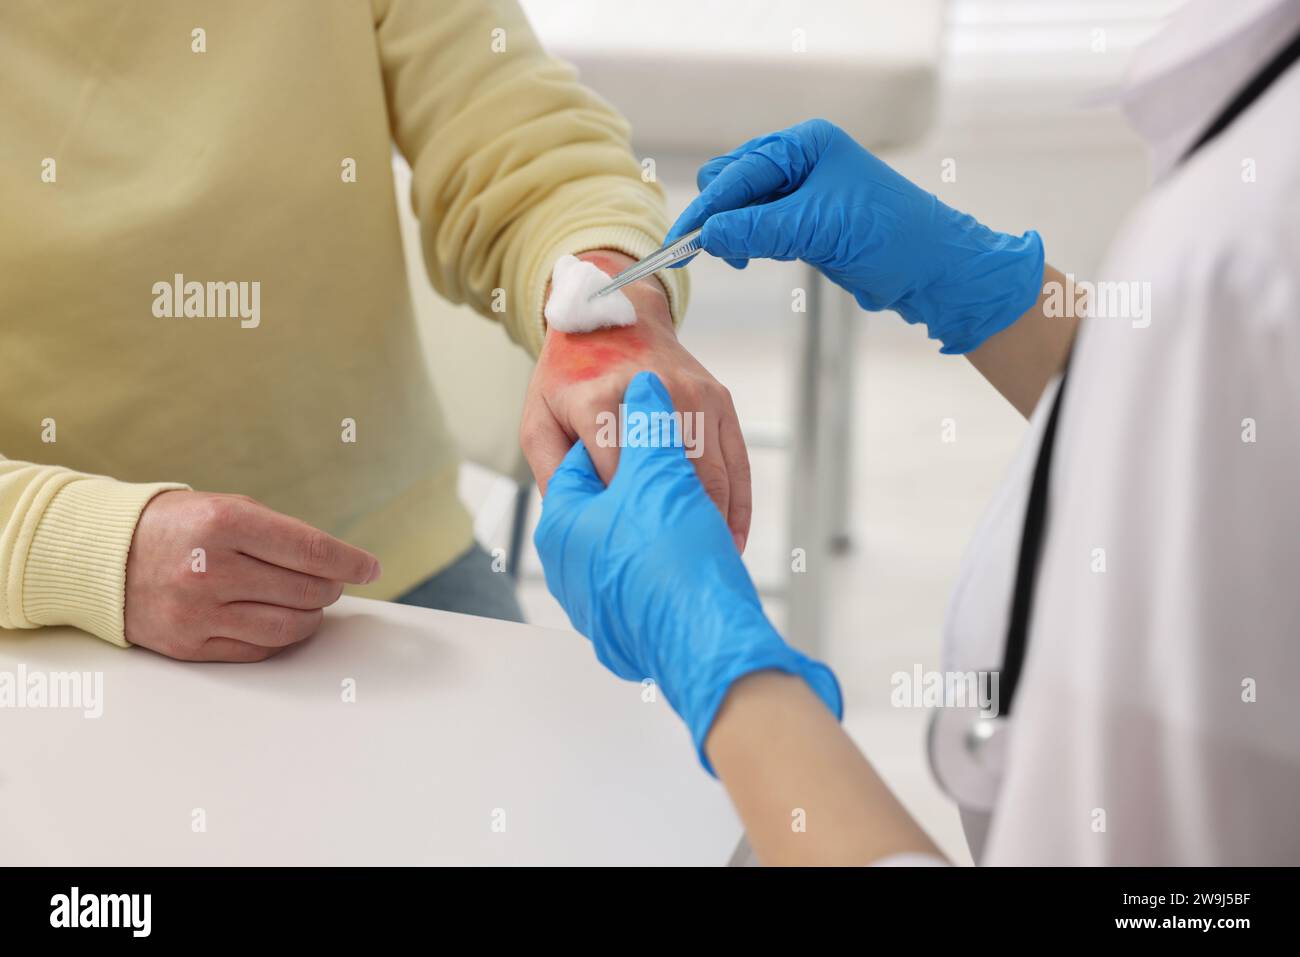 Doctor treating patient's burned hand indoors, closeup Stock Photo